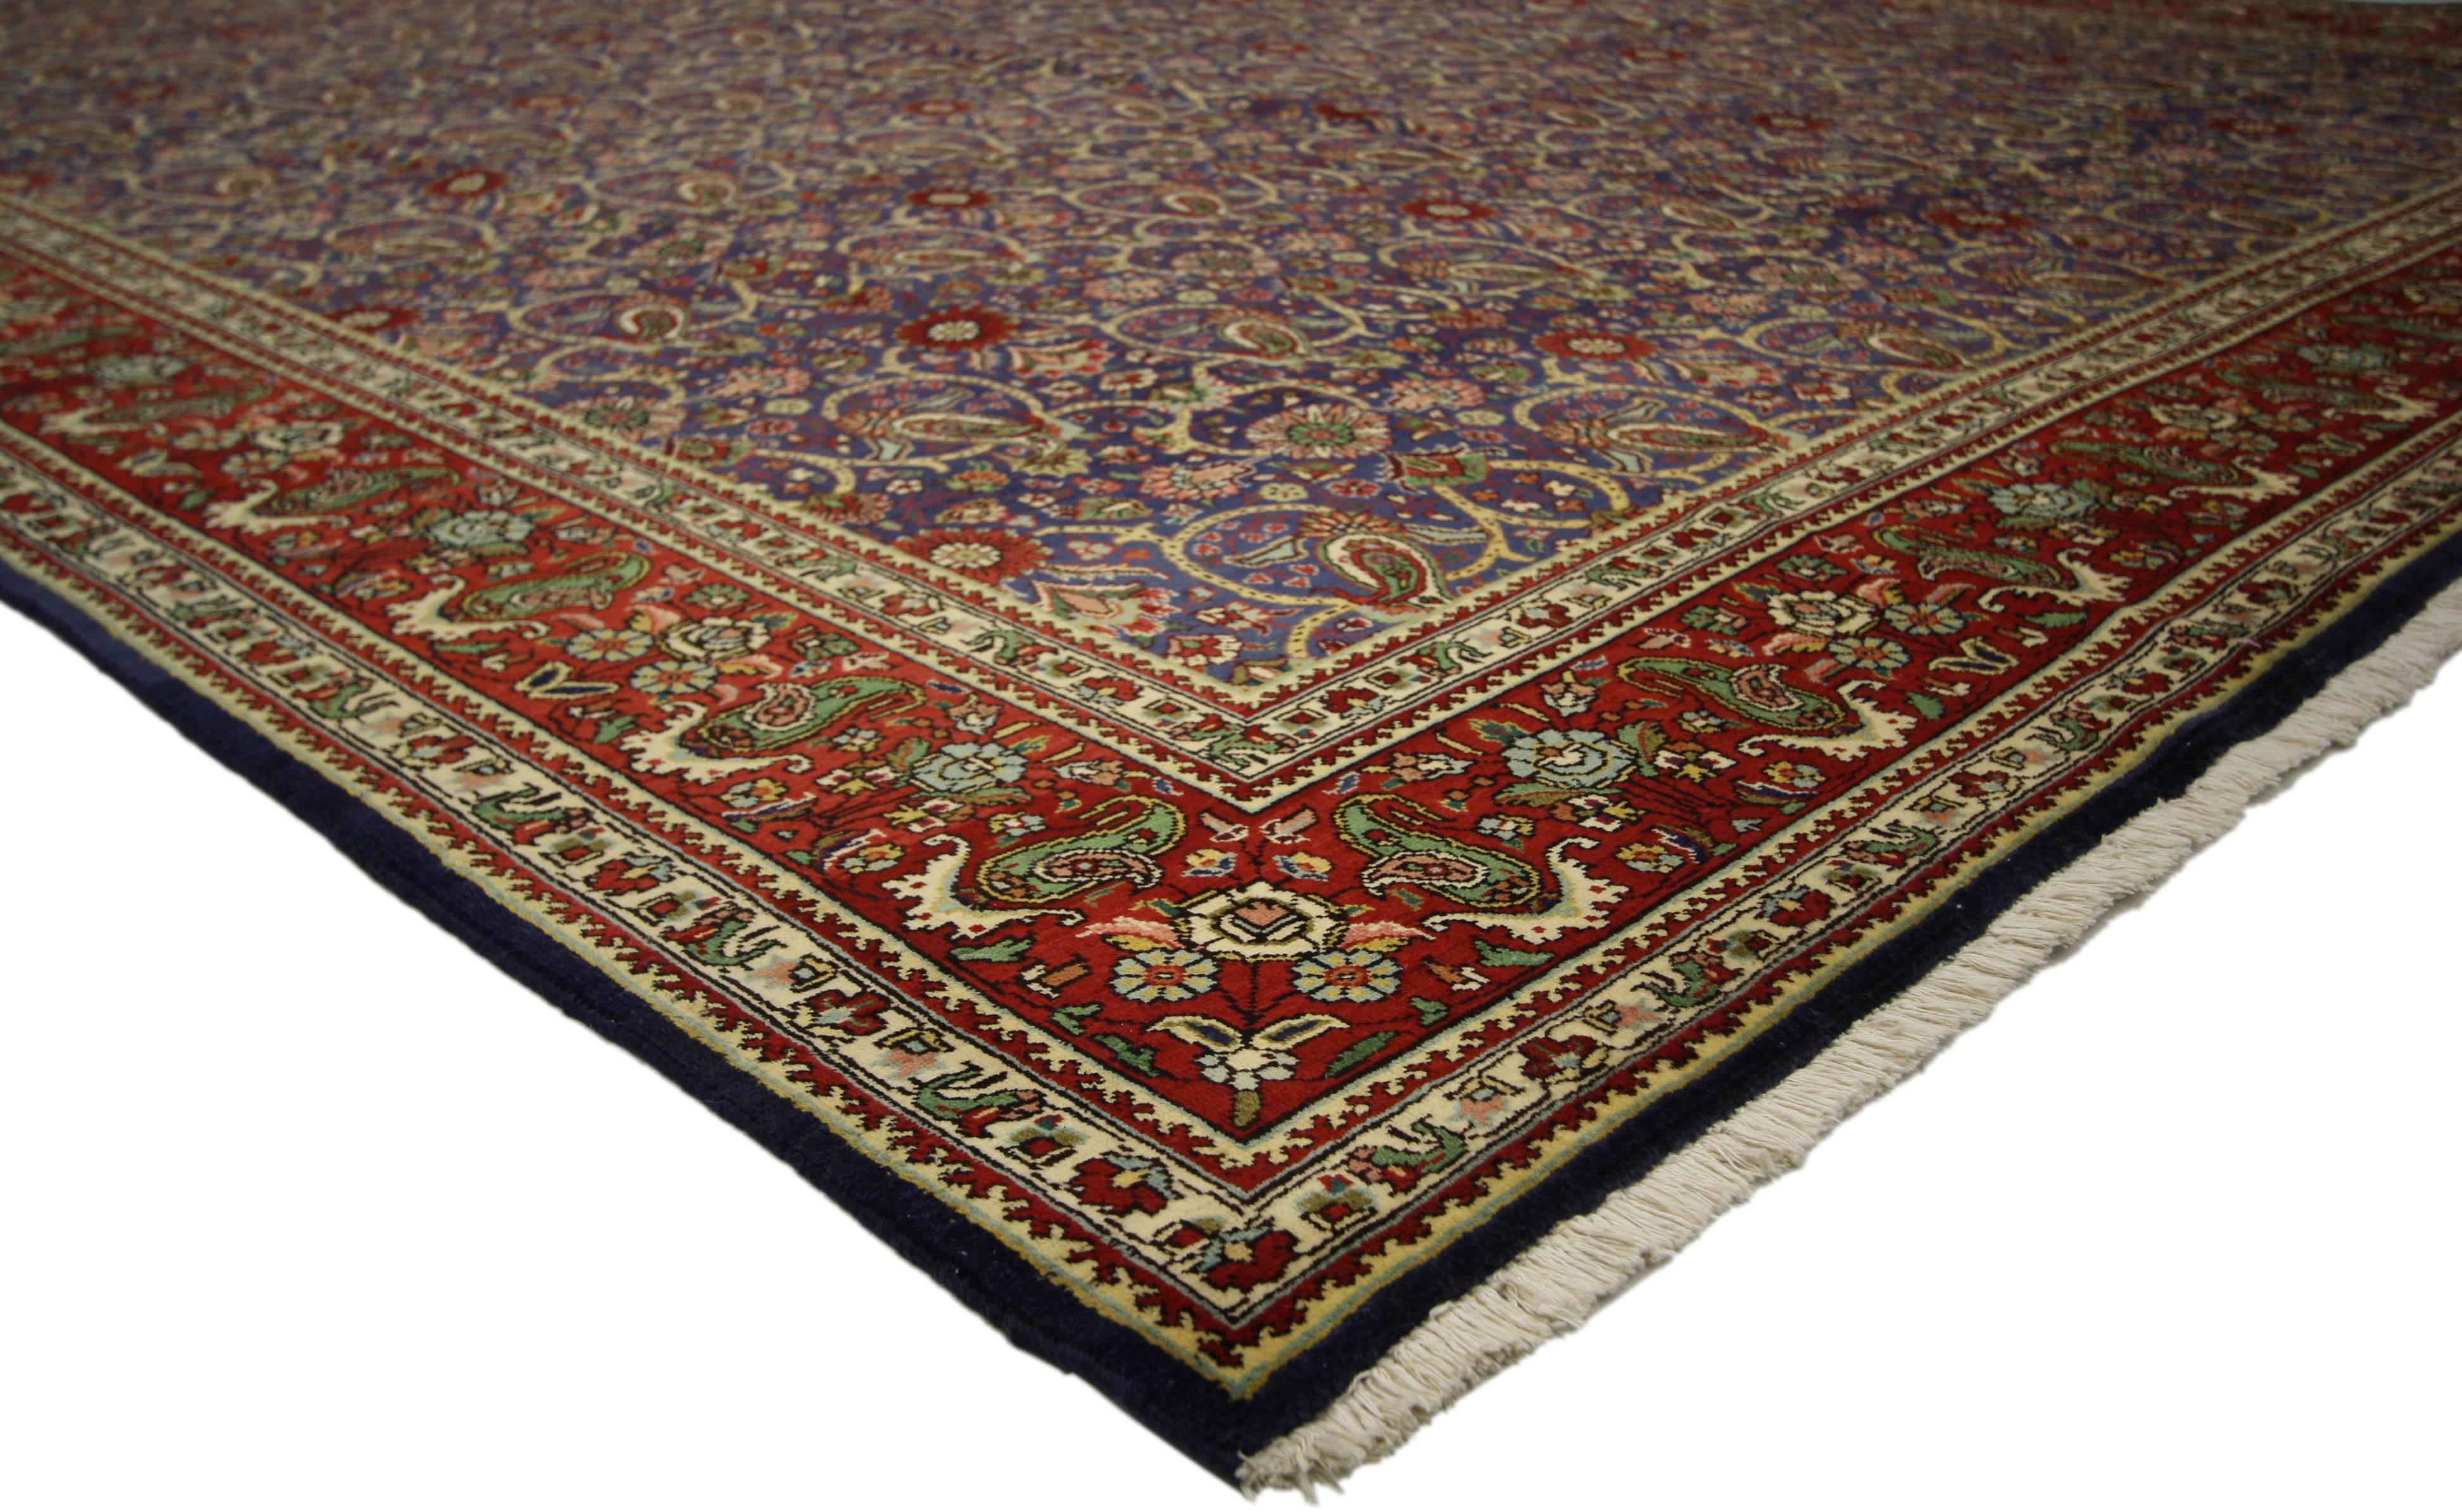 76331, Vintage Persian Tabriz rug with traditional style. This hand-knotted wool vintage Persian Tabriz rug features an all-over pattern surrounded by a classic border creating a well-balanced and timeless design. This vintage Persian Tabriz rug